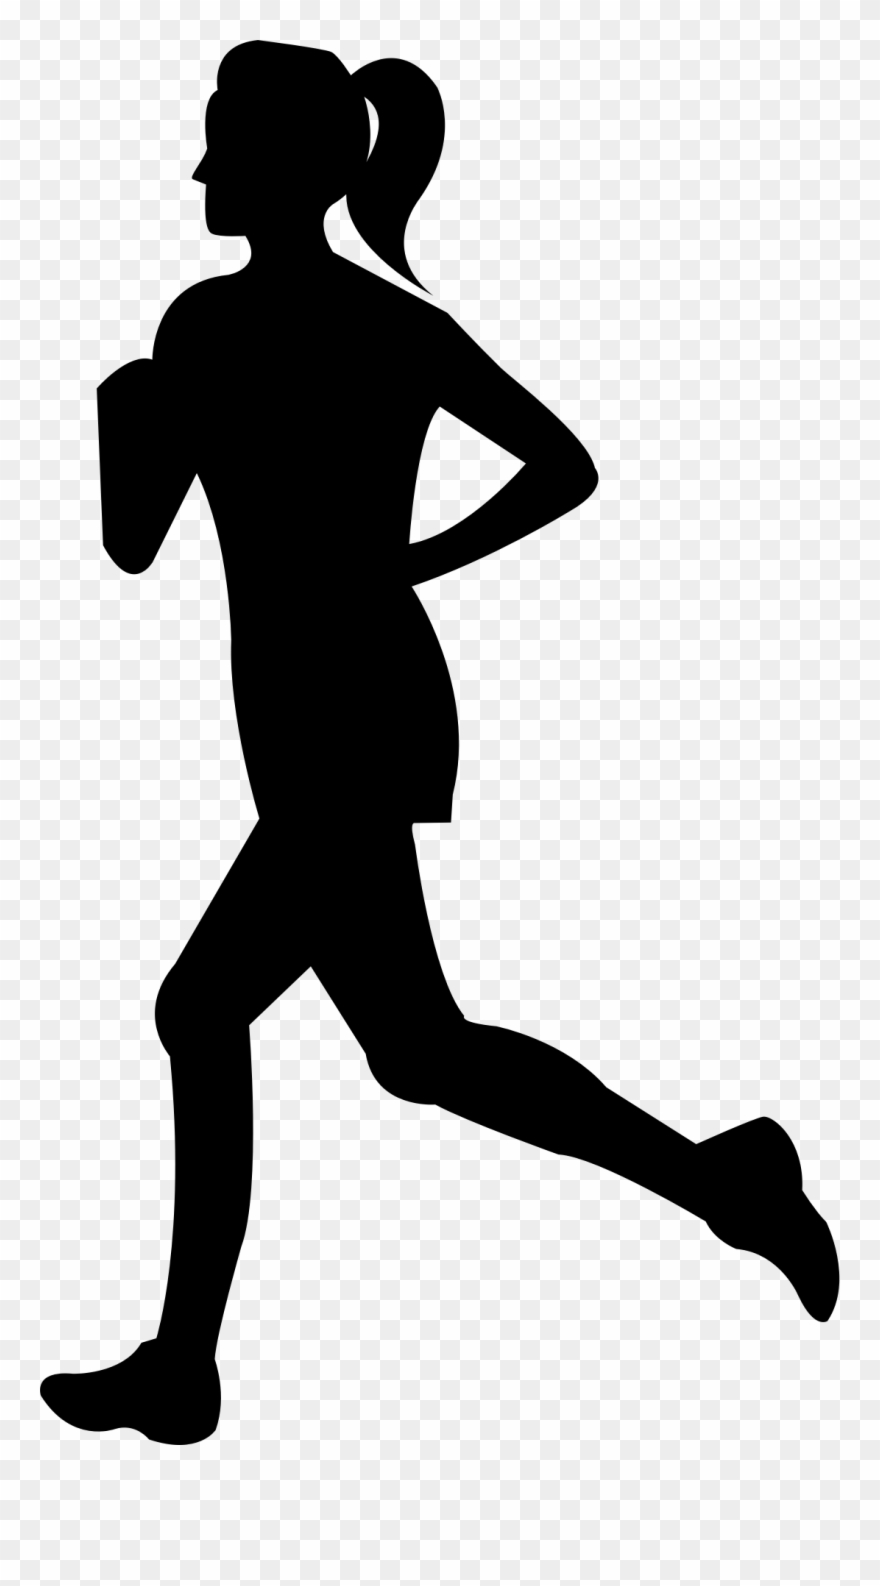 Free Clip Art Of Person Running Clipart Silhouette